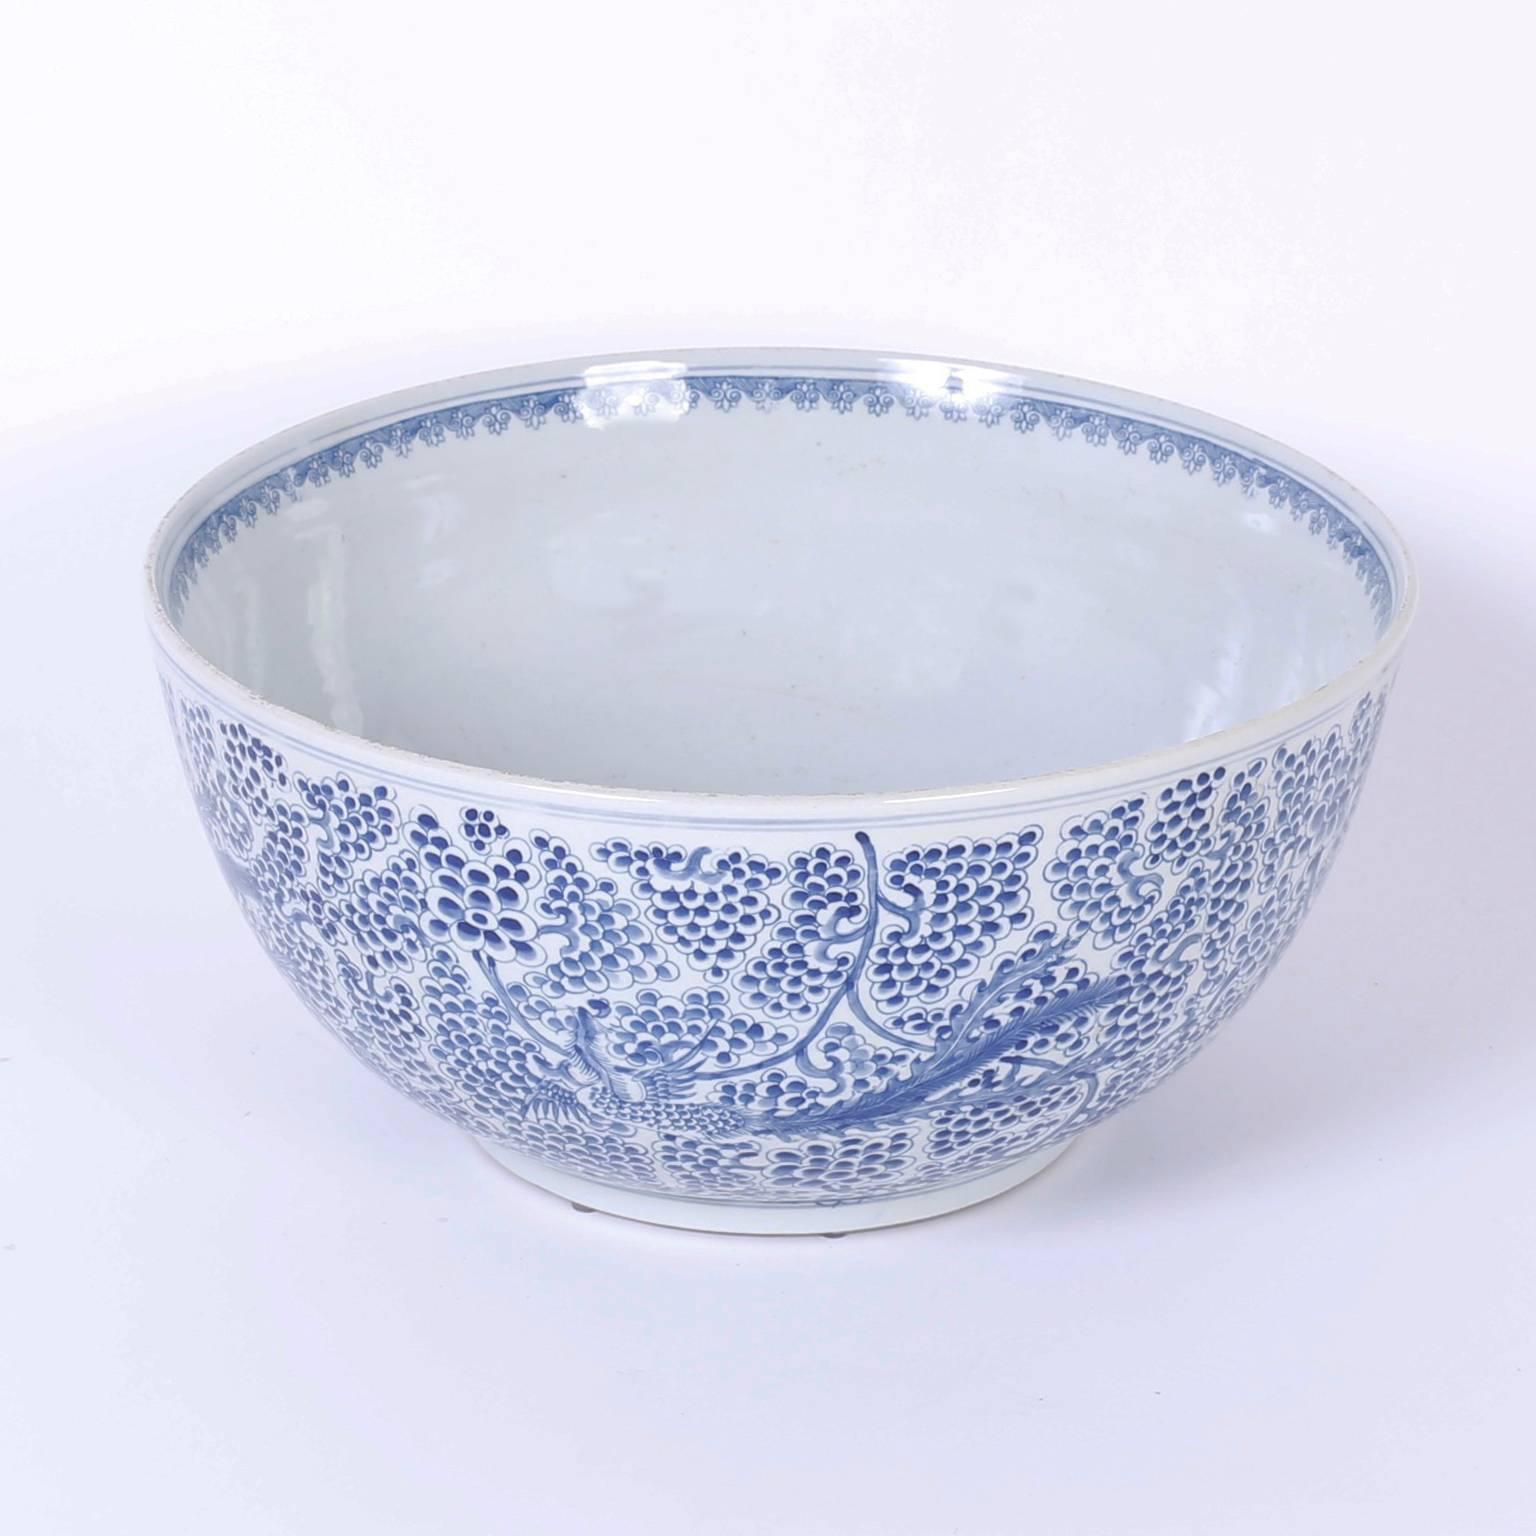 Blue and white Chinese porcelain footed bowl with perfect proportions and hand decorated with phoenix birds against an intricate floral field.
 